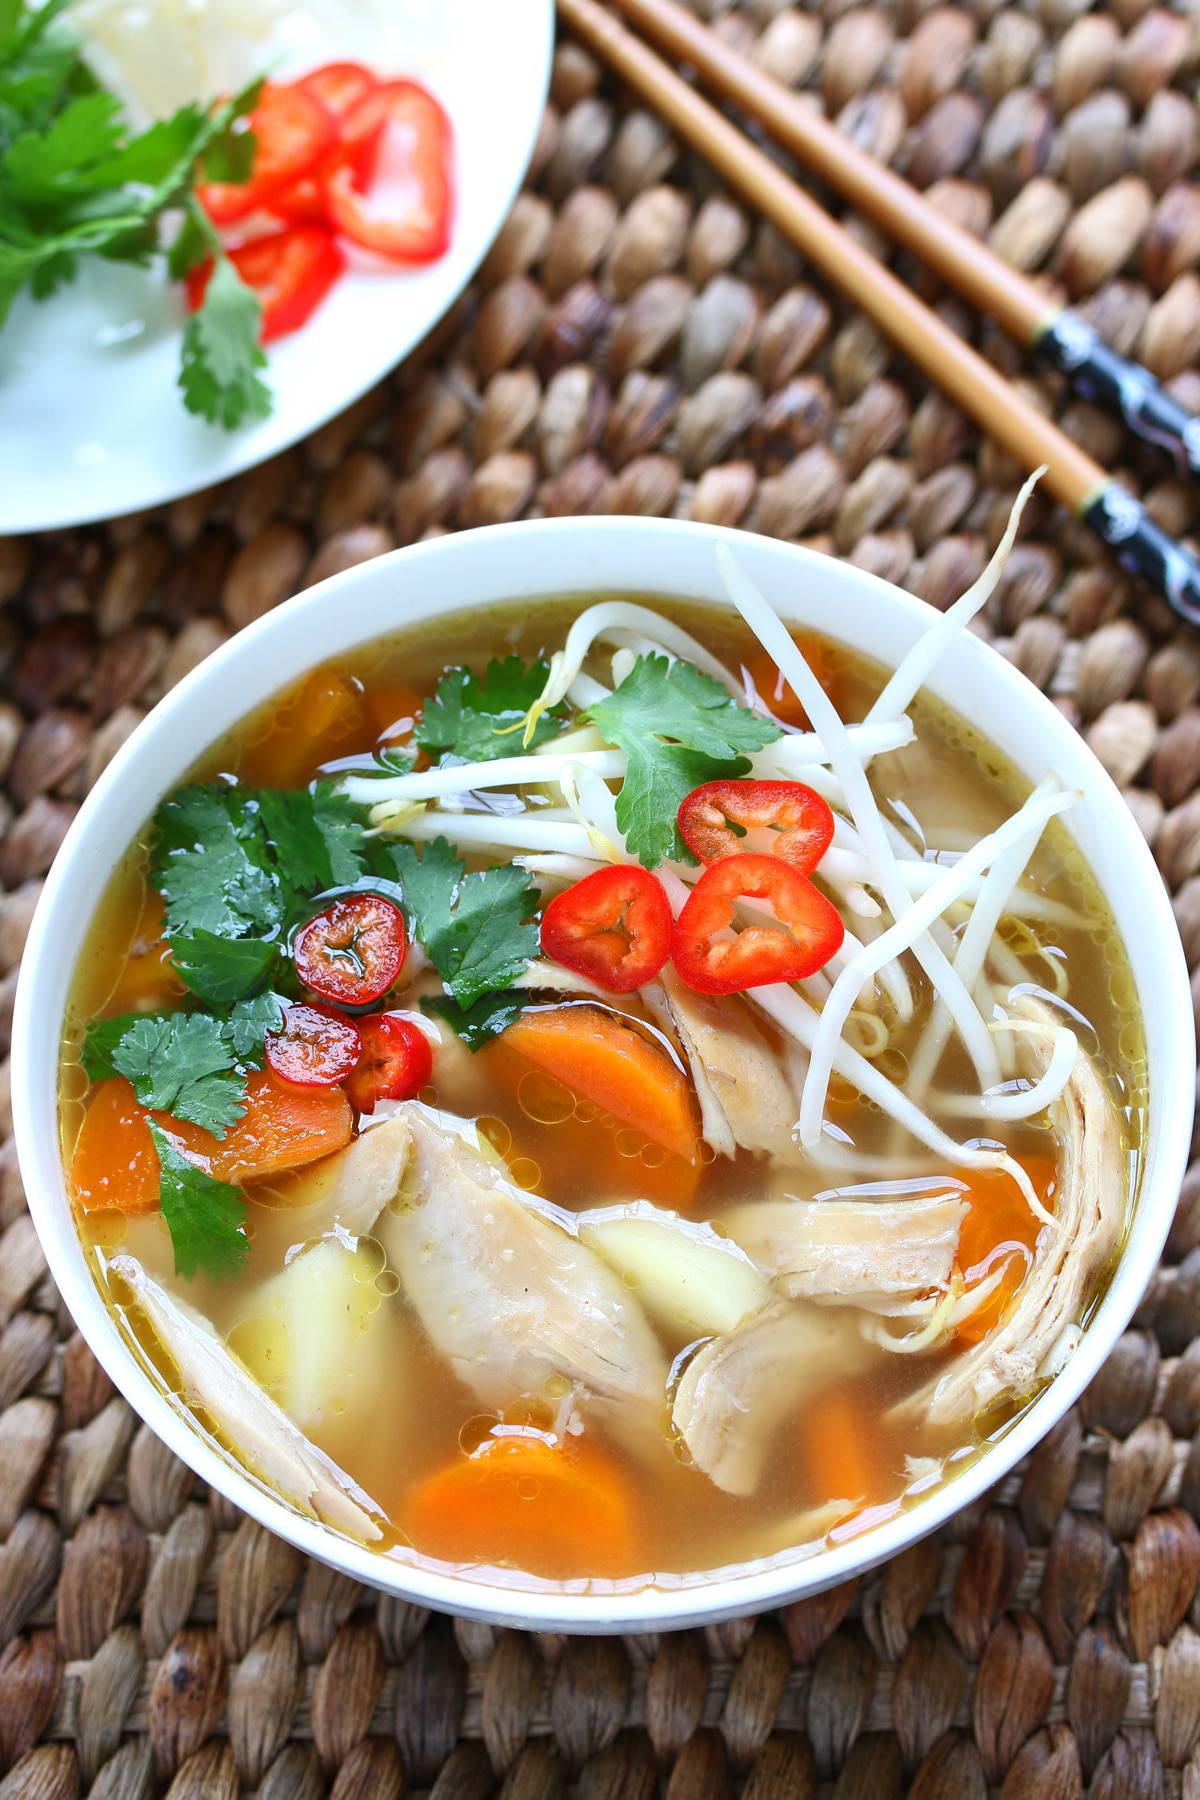 Asian chicken soup recipe Chinese Indonesian vegetables spices spiced lemongrass healthy gluten free